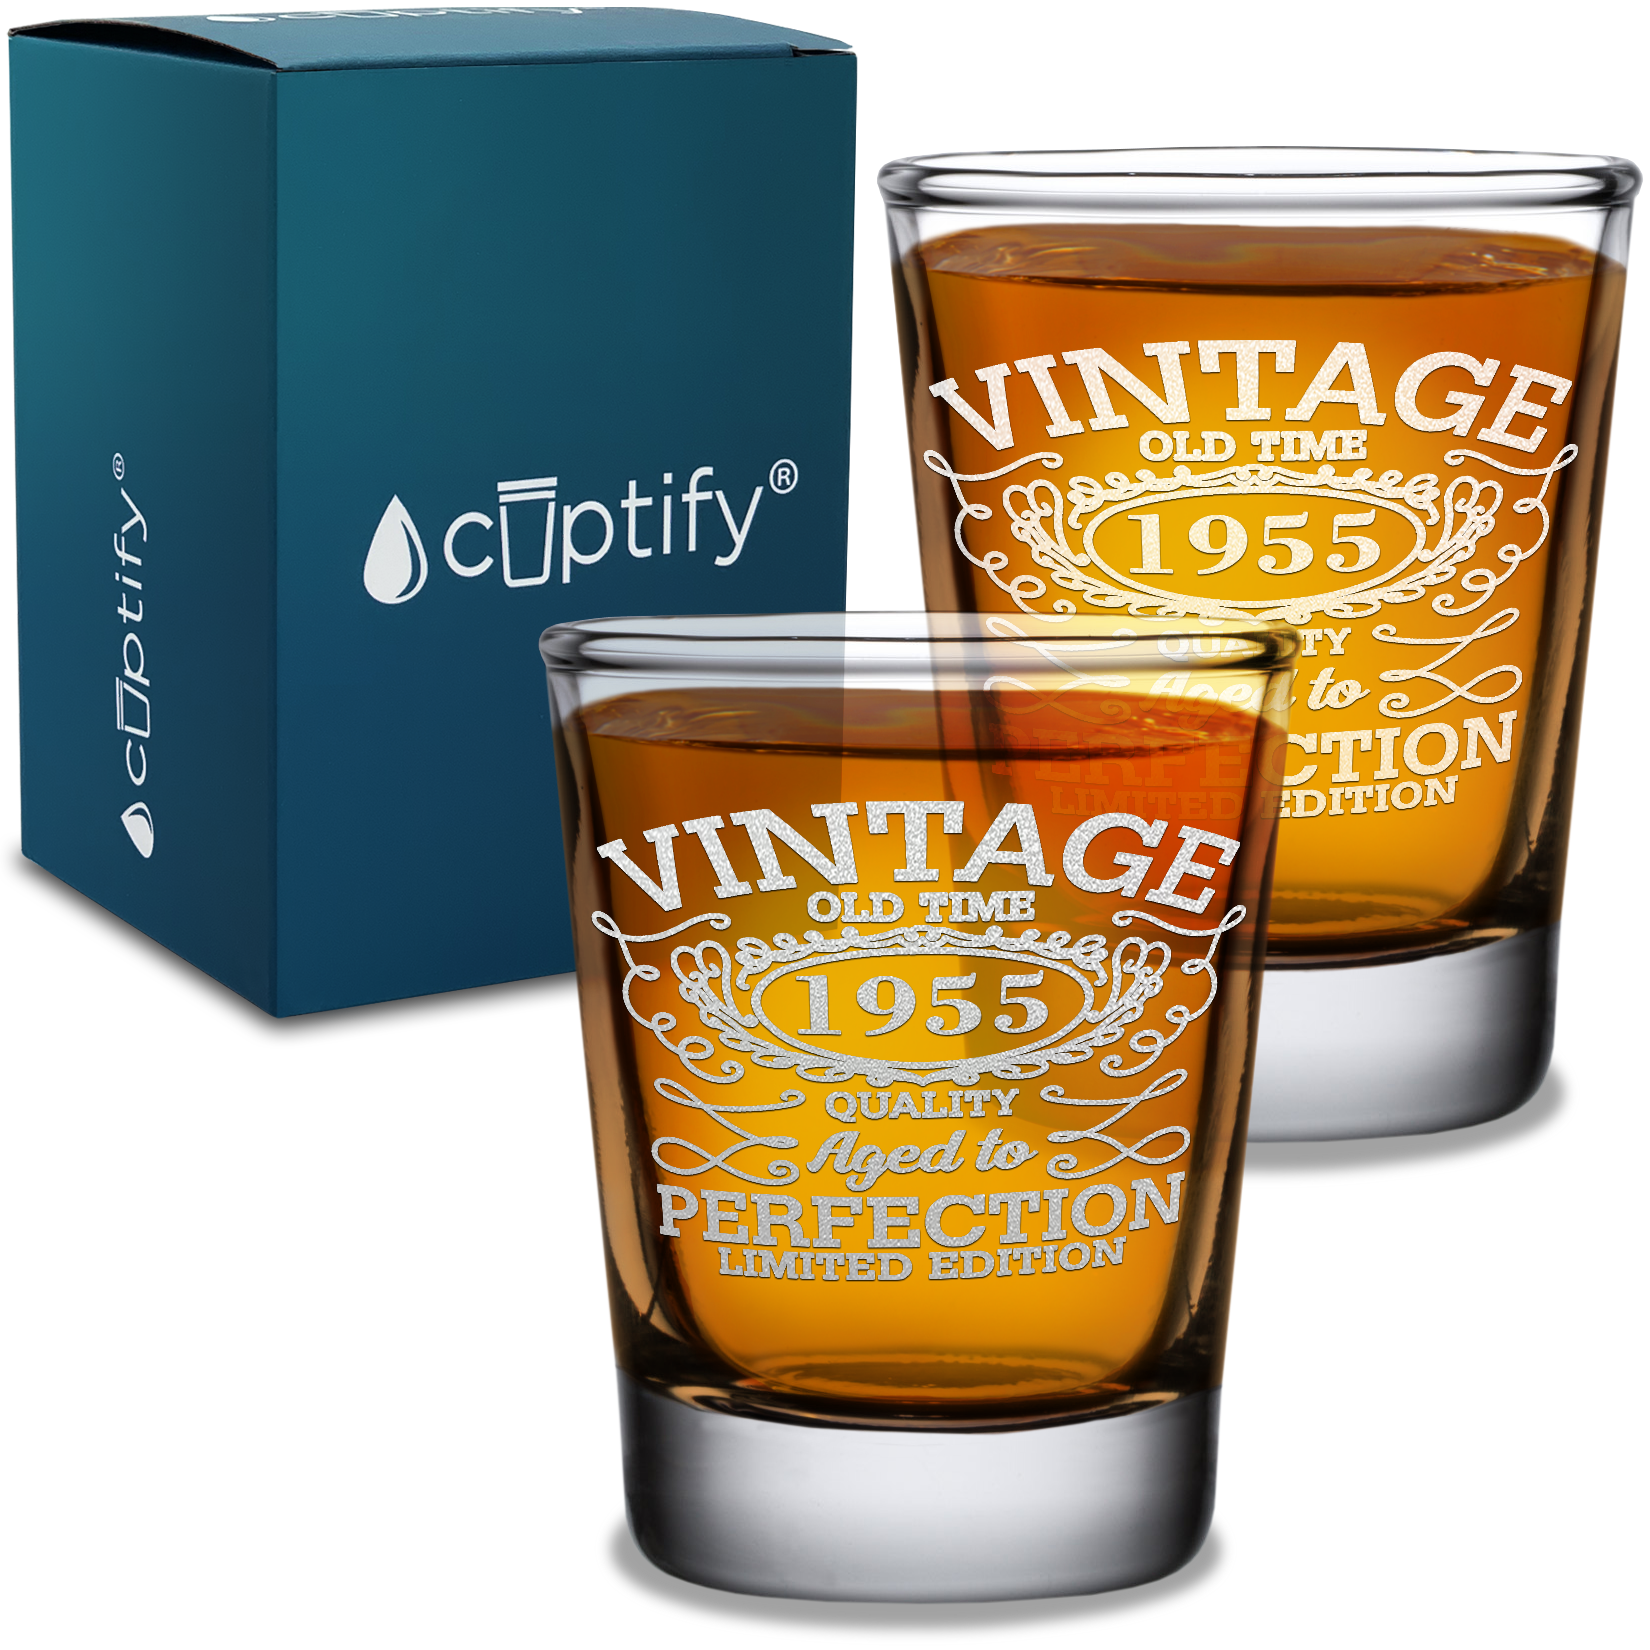 66th Birthday Vintage 66 Years Old Time 1955 Quality Laser Engraved 2oz Shot Glasses - Set of 2